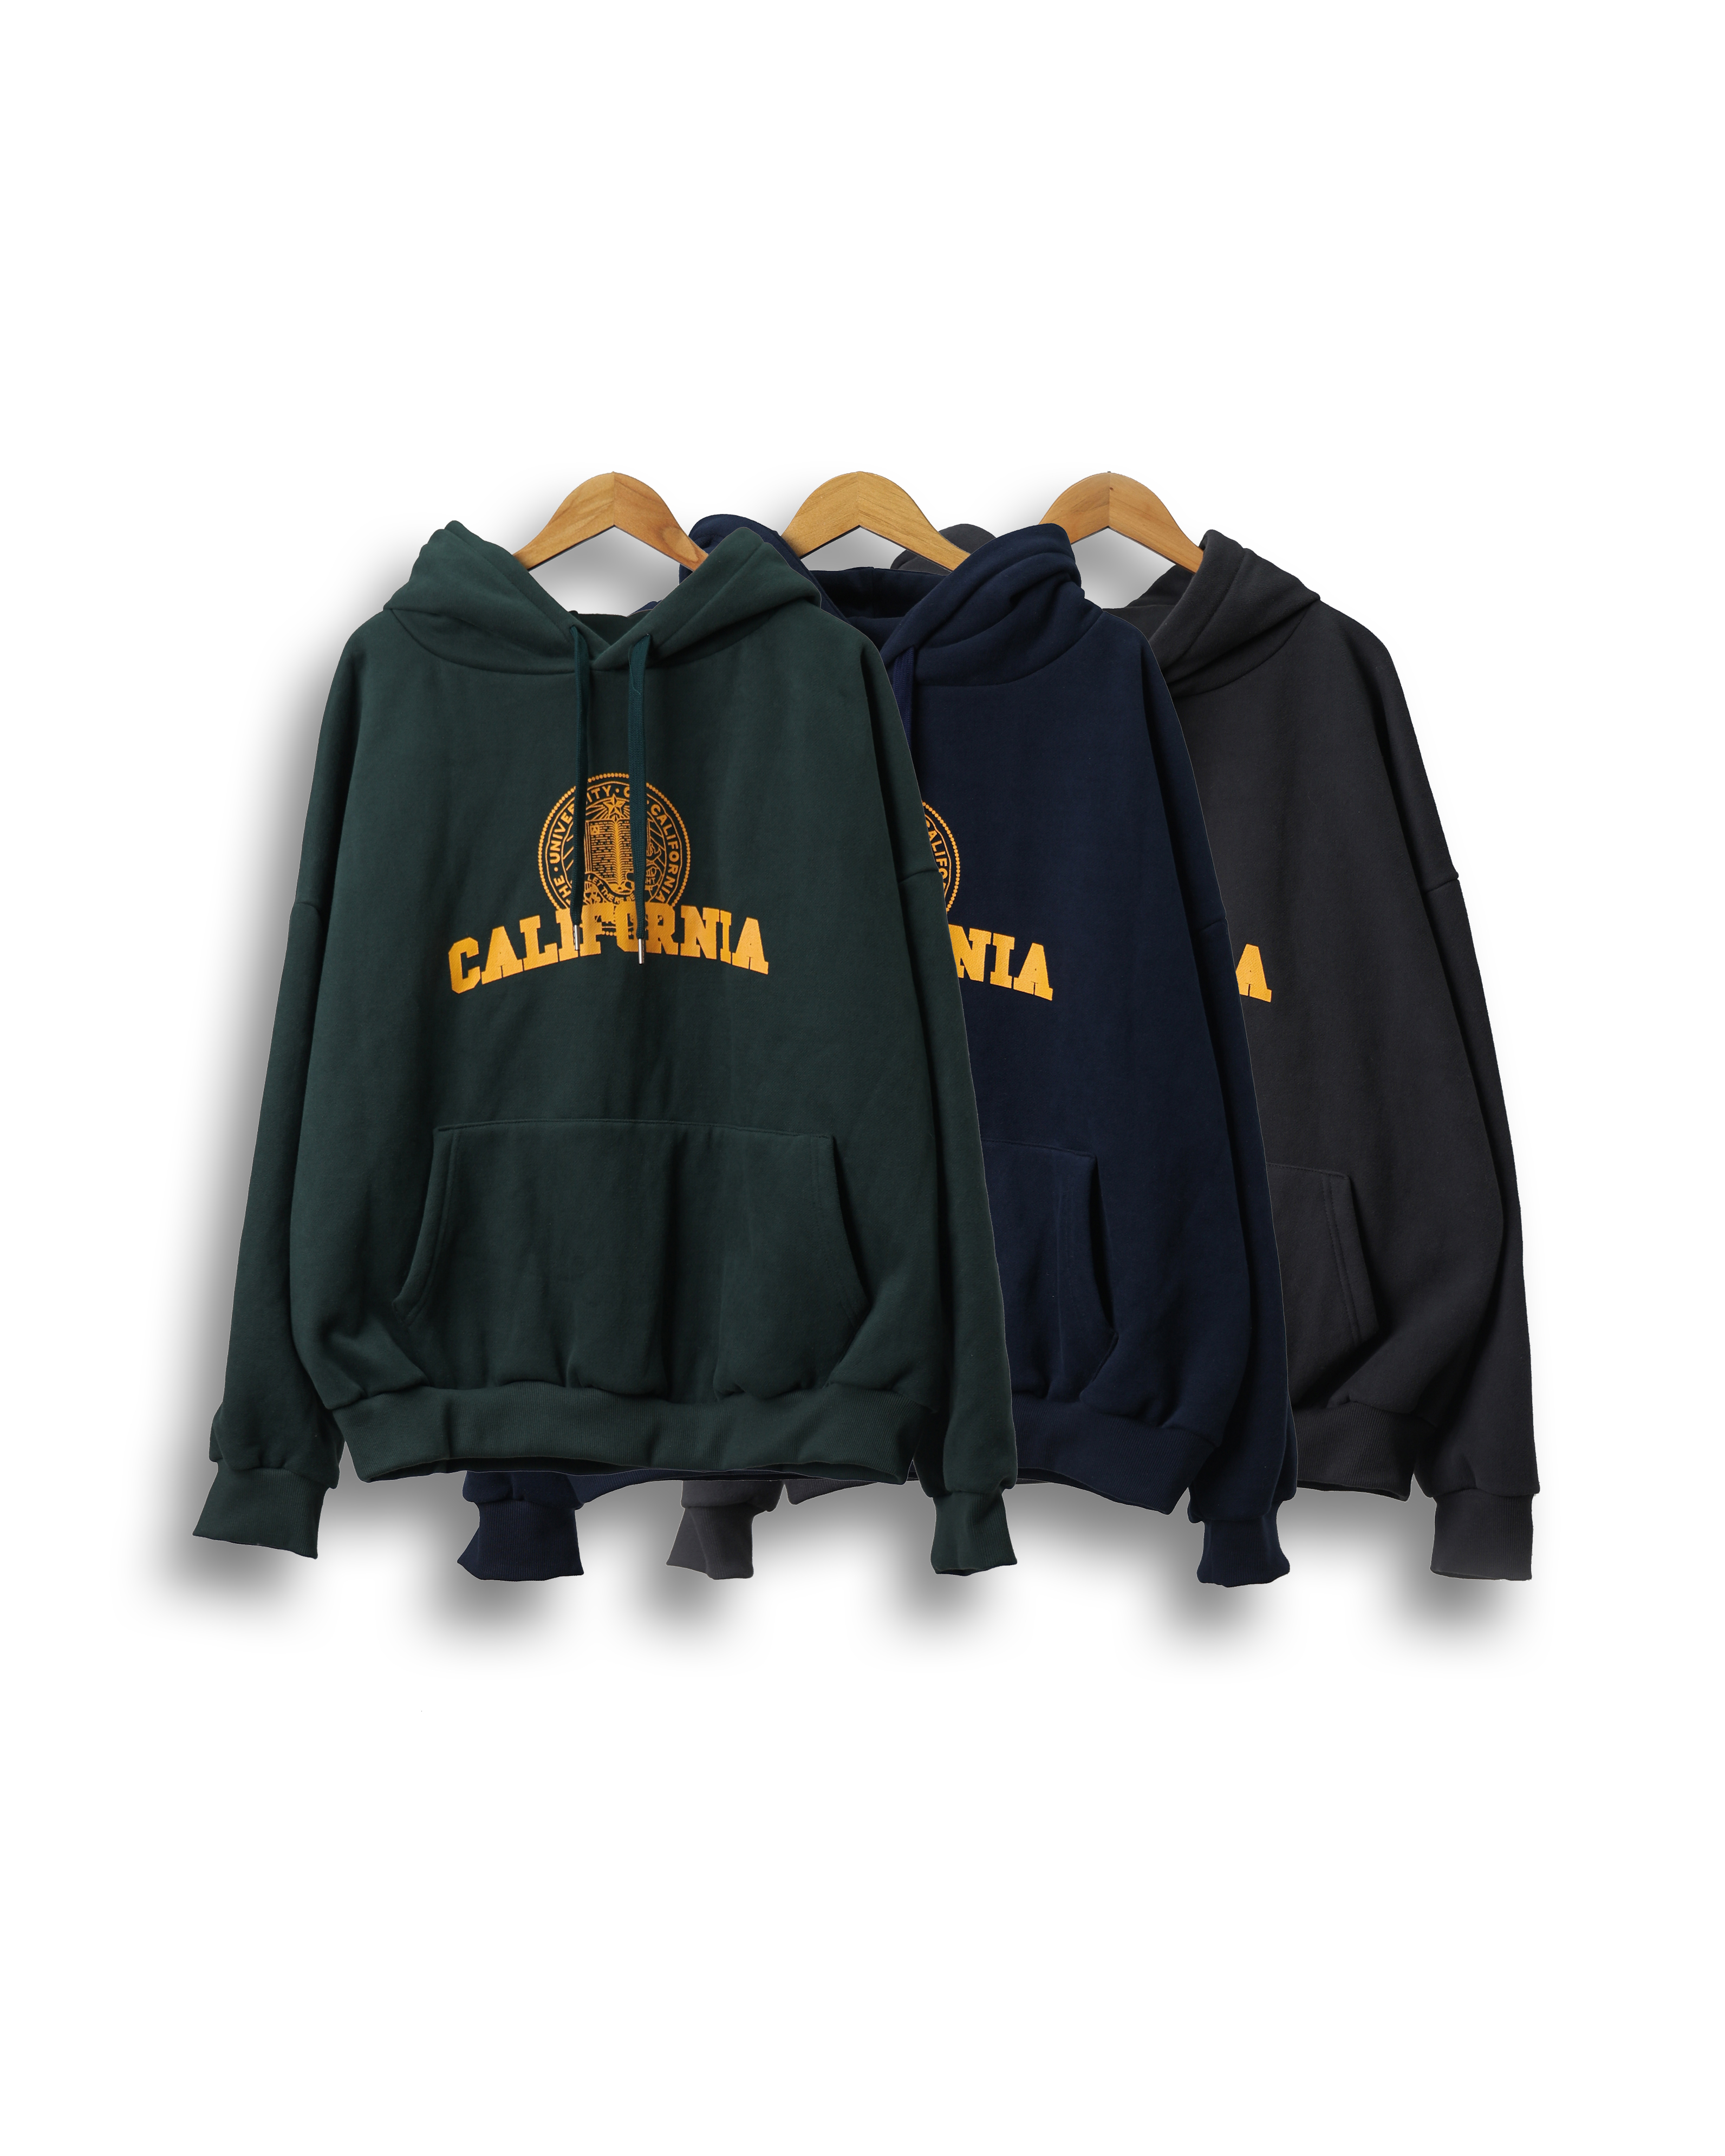 TAKTRE CALIFORNIA Oversized Icon Hoodie (Charcoal/Navy/Green)